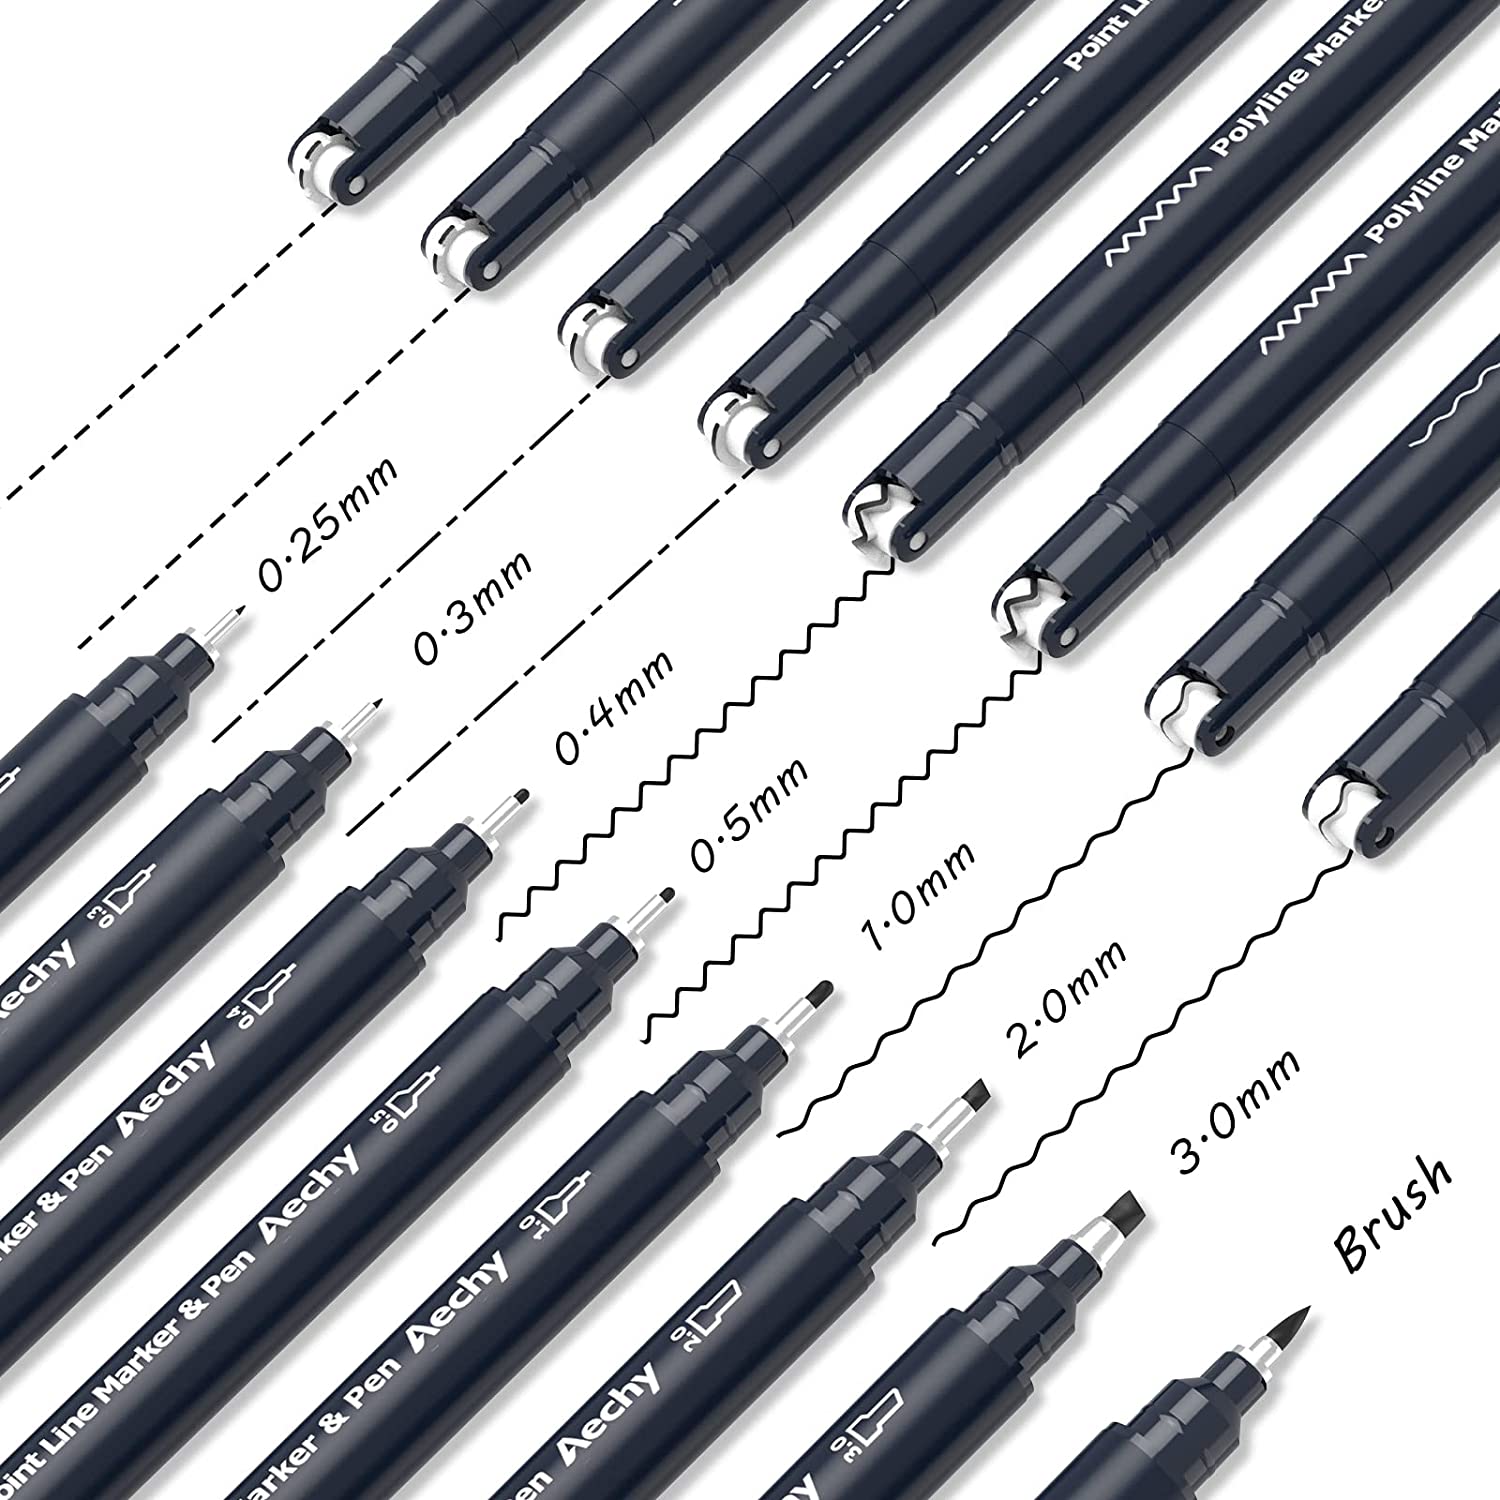 (Play Time, Inc.) AECHY Dual-Tip Calligraphy Pen 8 Sizes and 4 Different Link Styles [Curve Pen04]